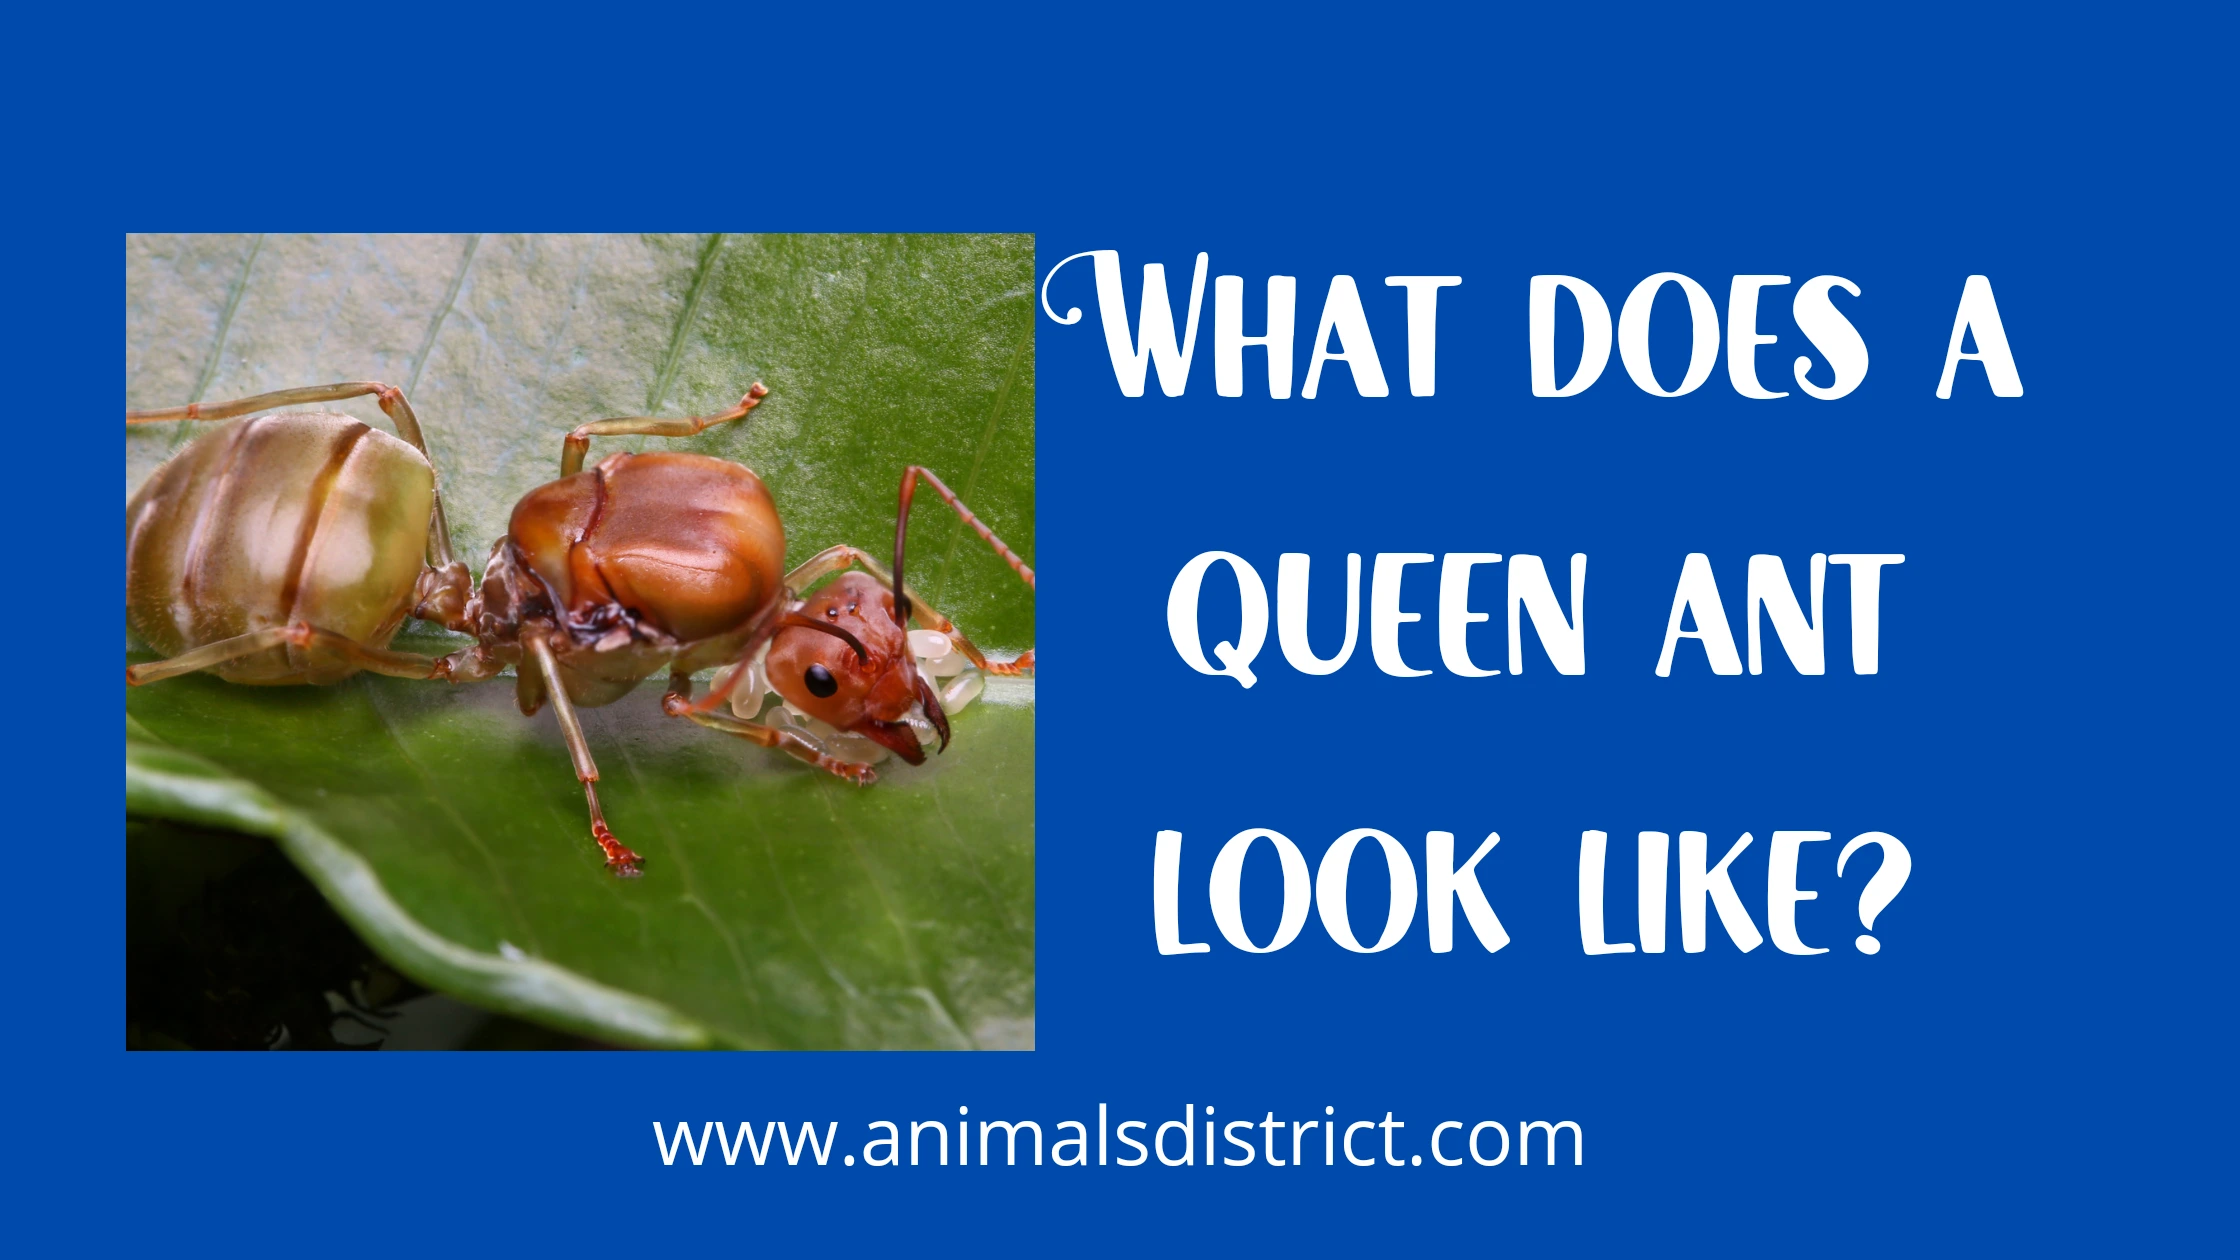 What does a queen ant look like